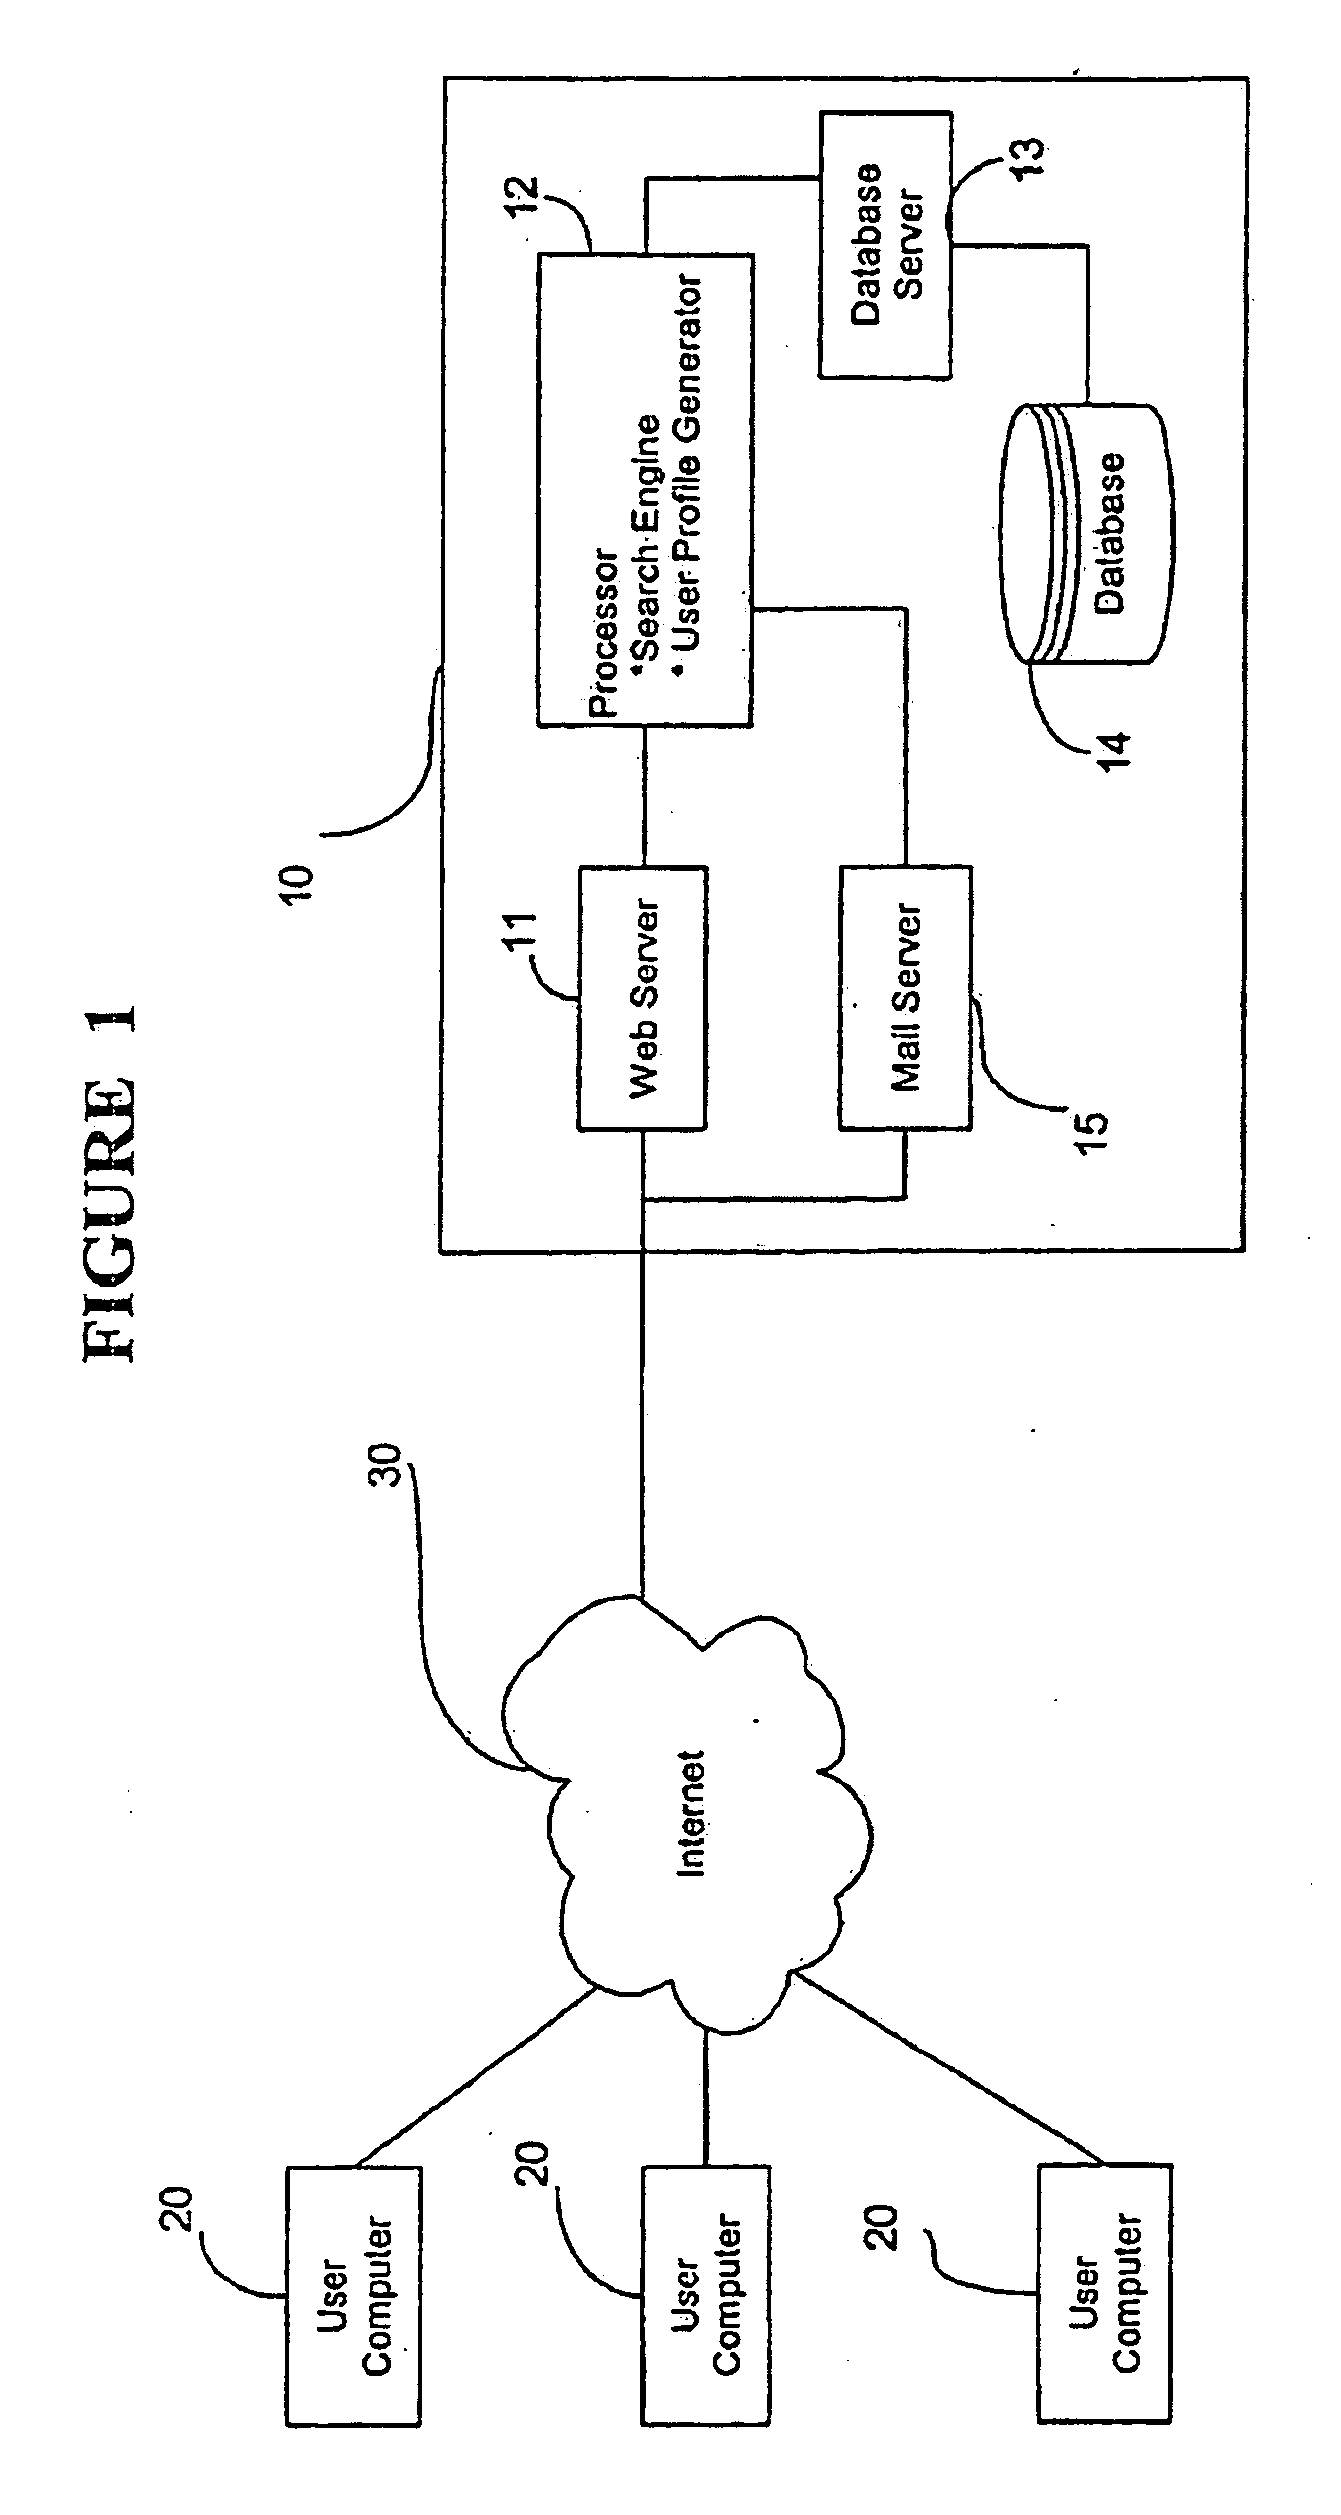 Method and system for determining relevant matches based on attributes